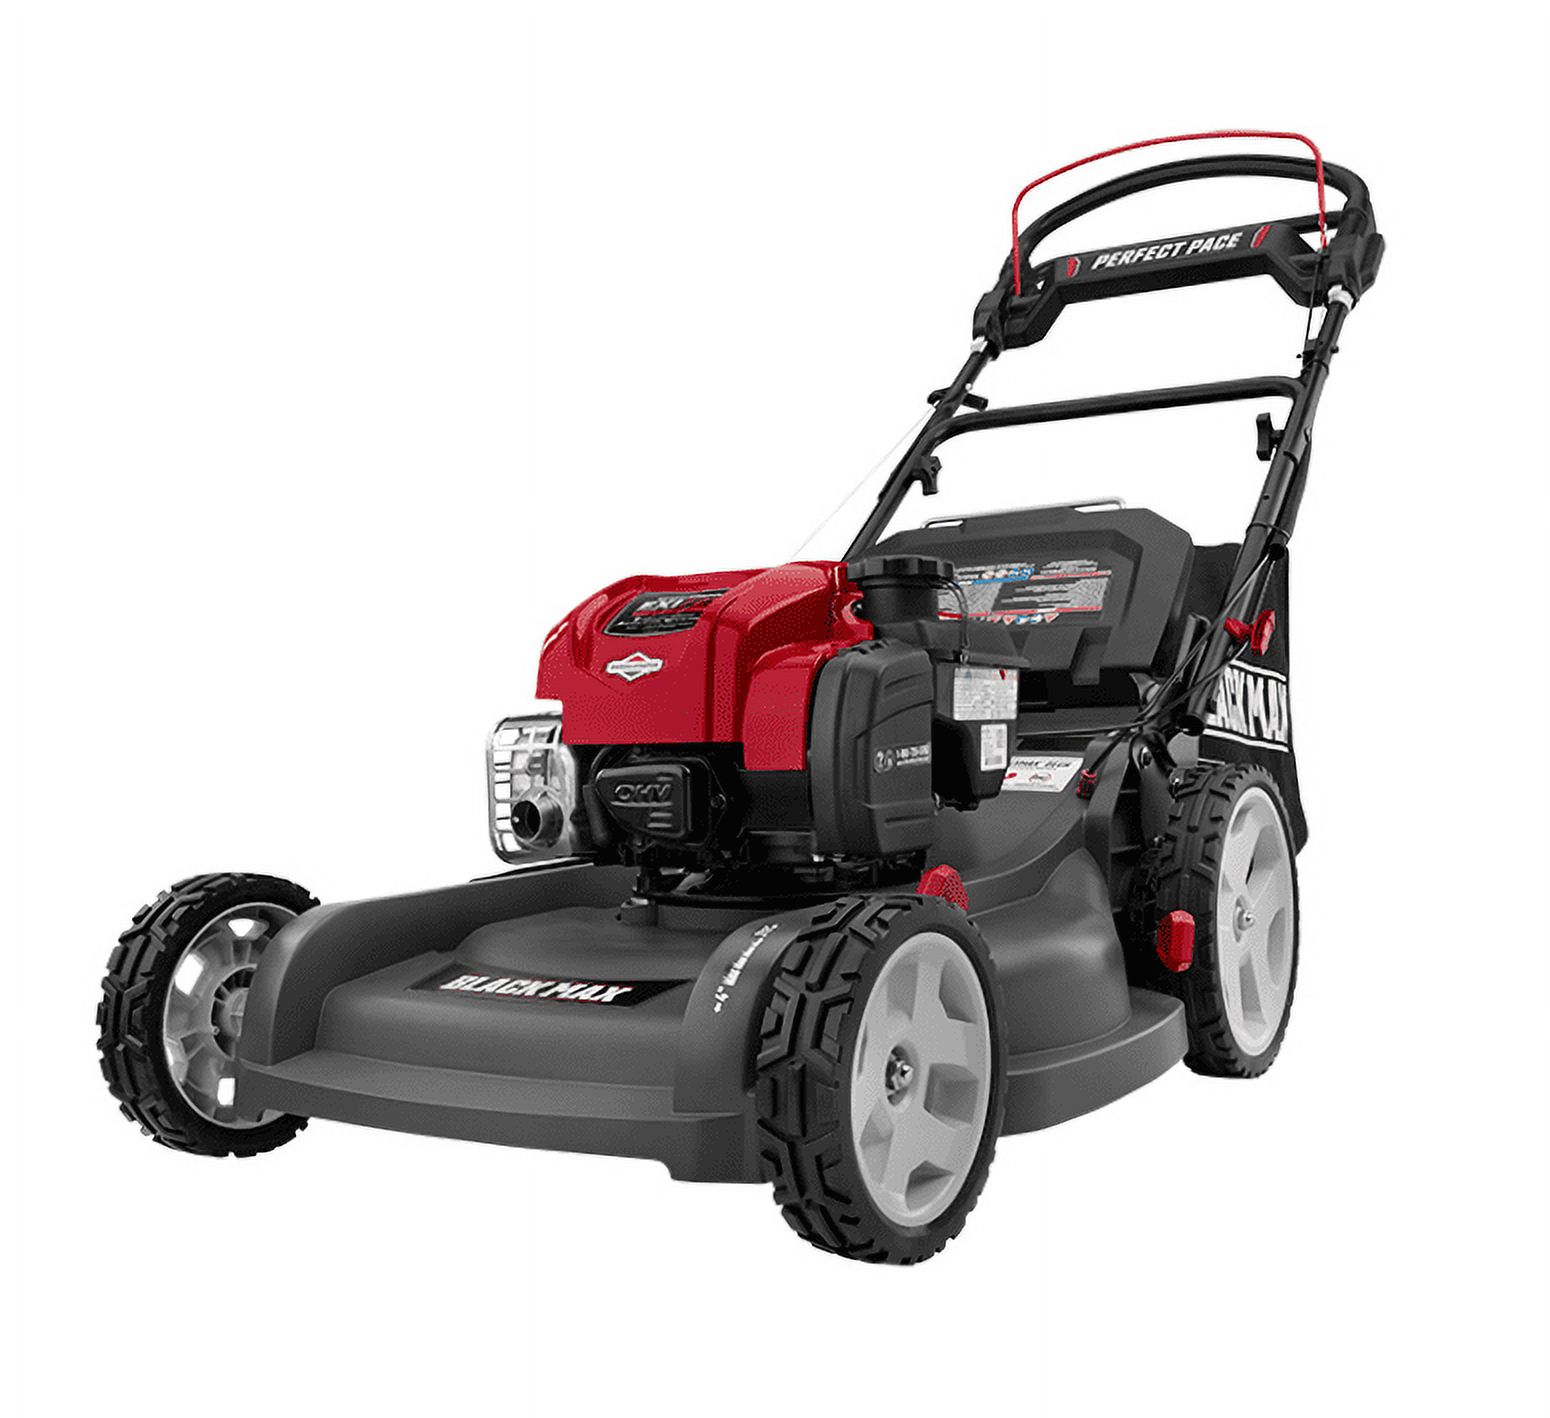 Black Max 21-inch 3-in-1 Self-Propelled Gas Mower with Perfect Pace Technology - image 1 of 8